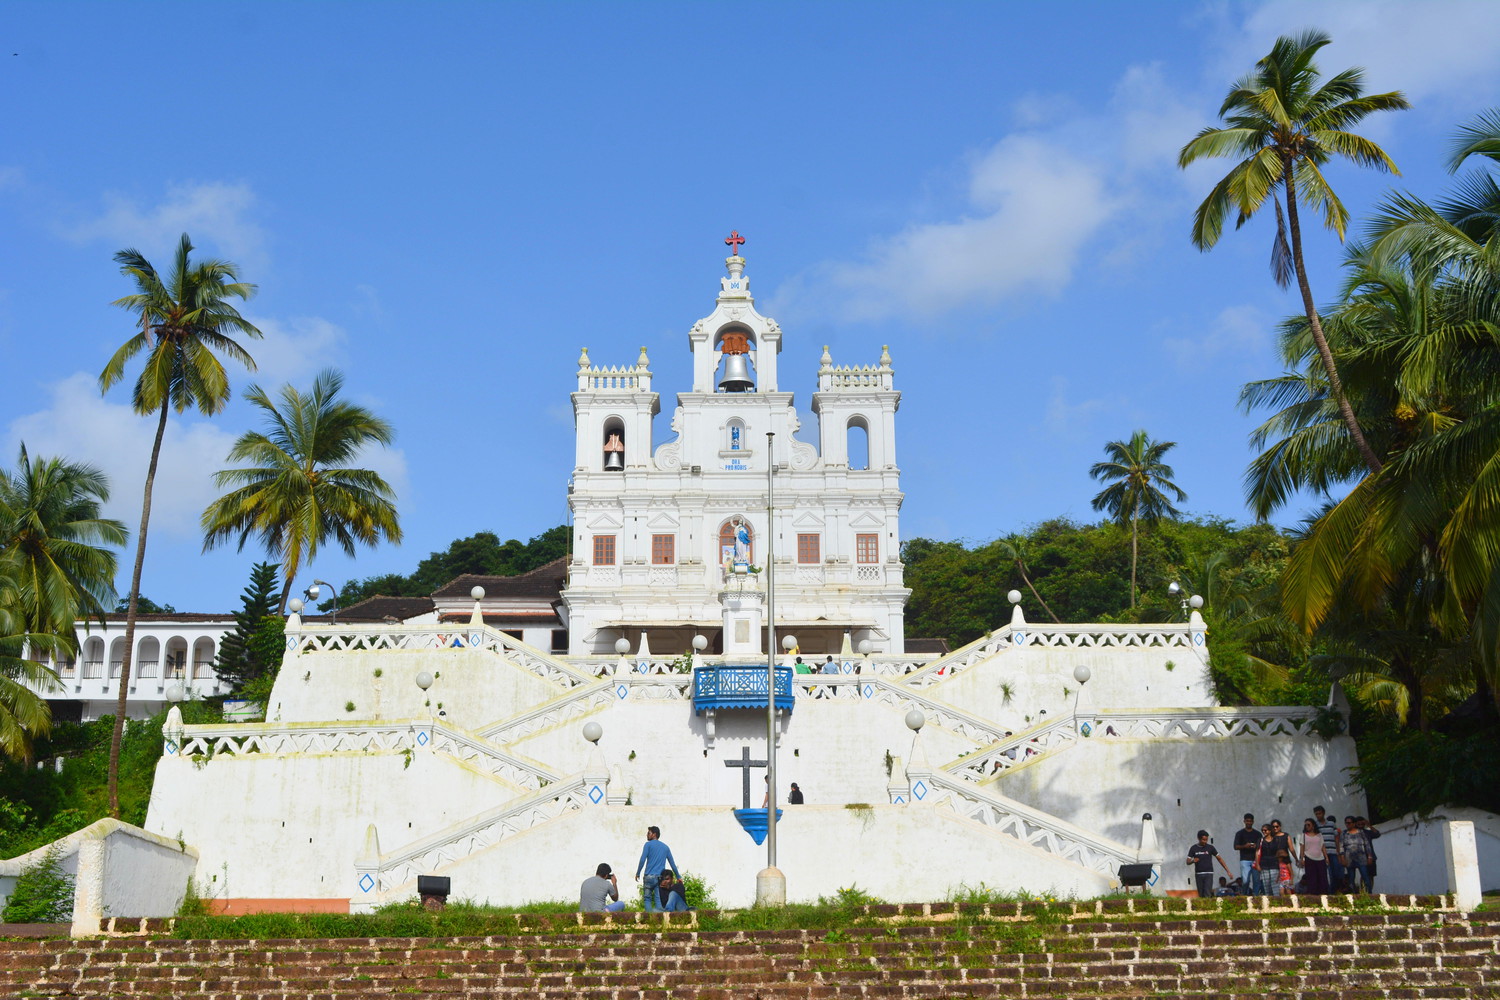 A colonial Portuguese Baroque style church atop a hill with zigzag stairs surrounded by palm trees